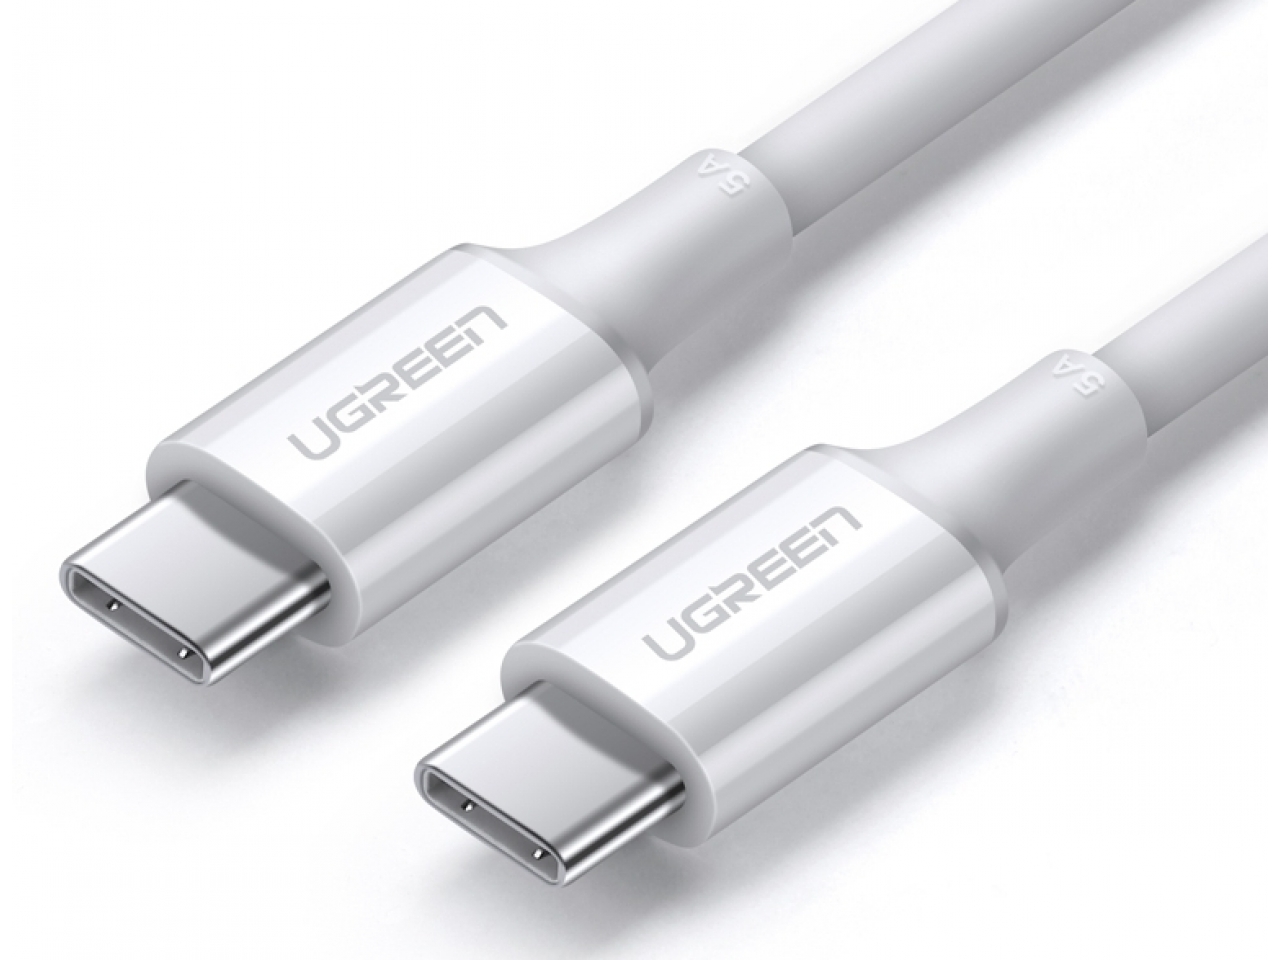 UGREEN Dual USB-C Power Delivery PD Ladegerät 36W 5-20V weiss